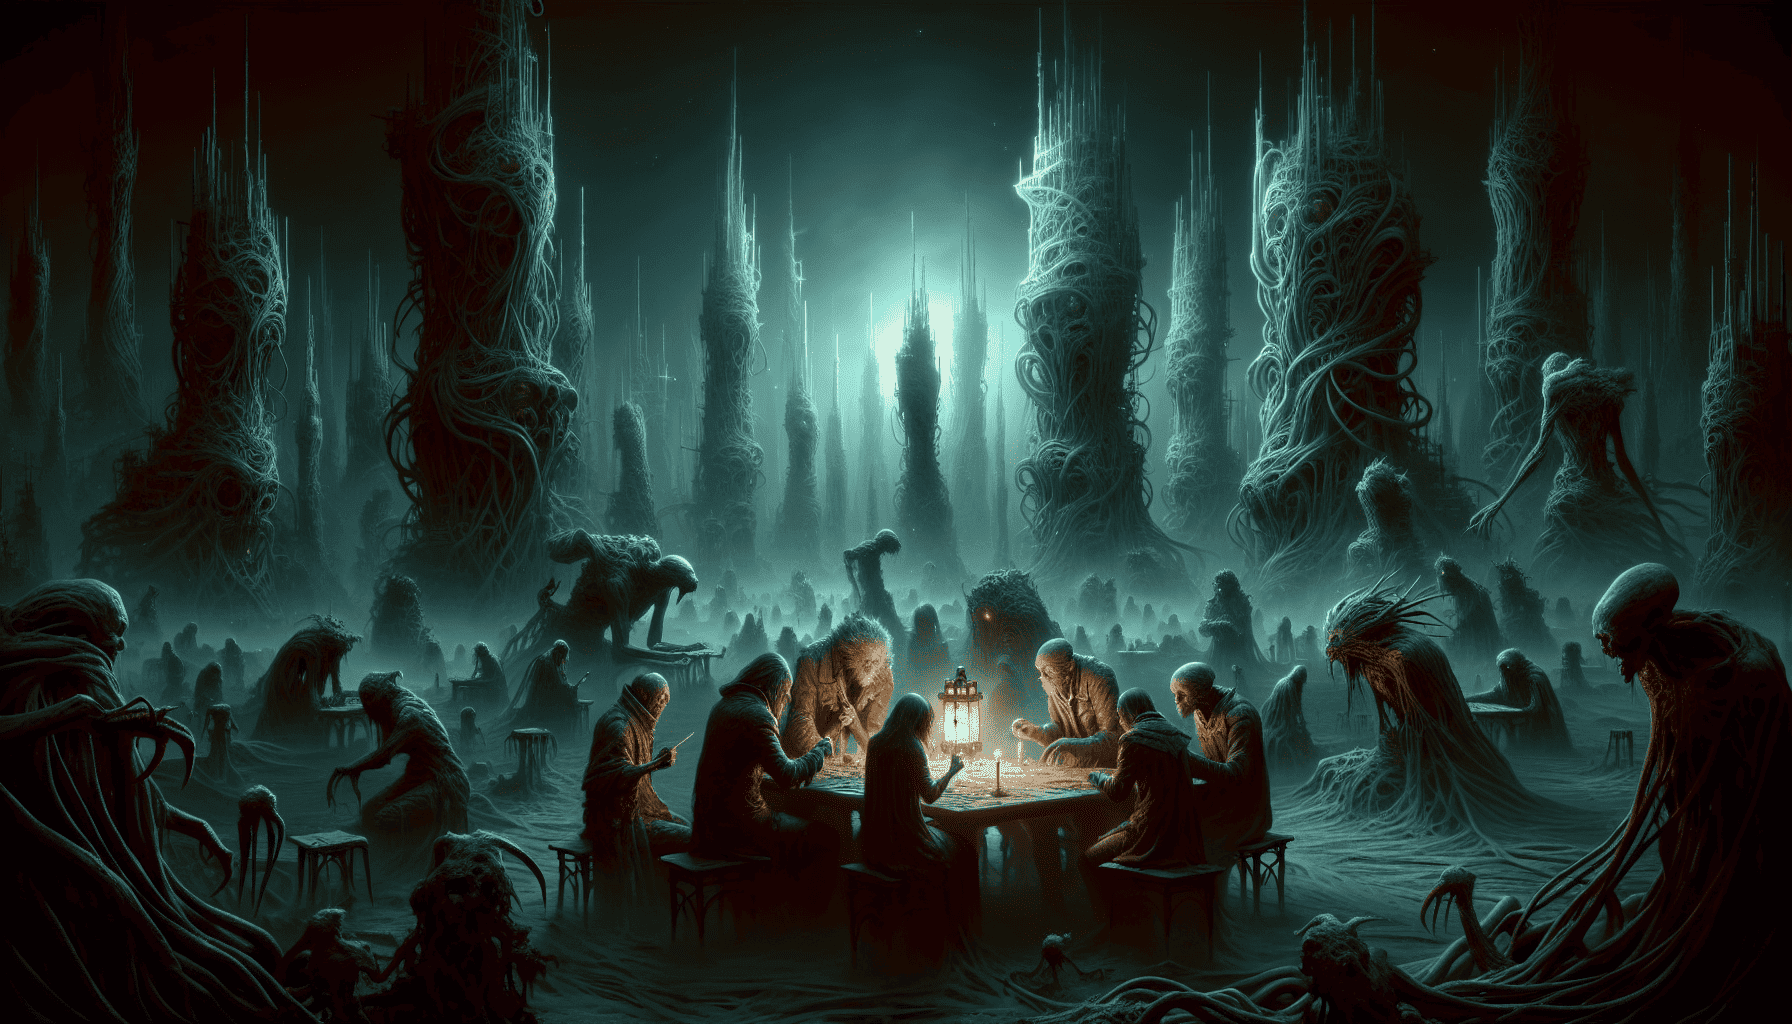 Illustration of eerie Lovecraftian world depicted in the card game